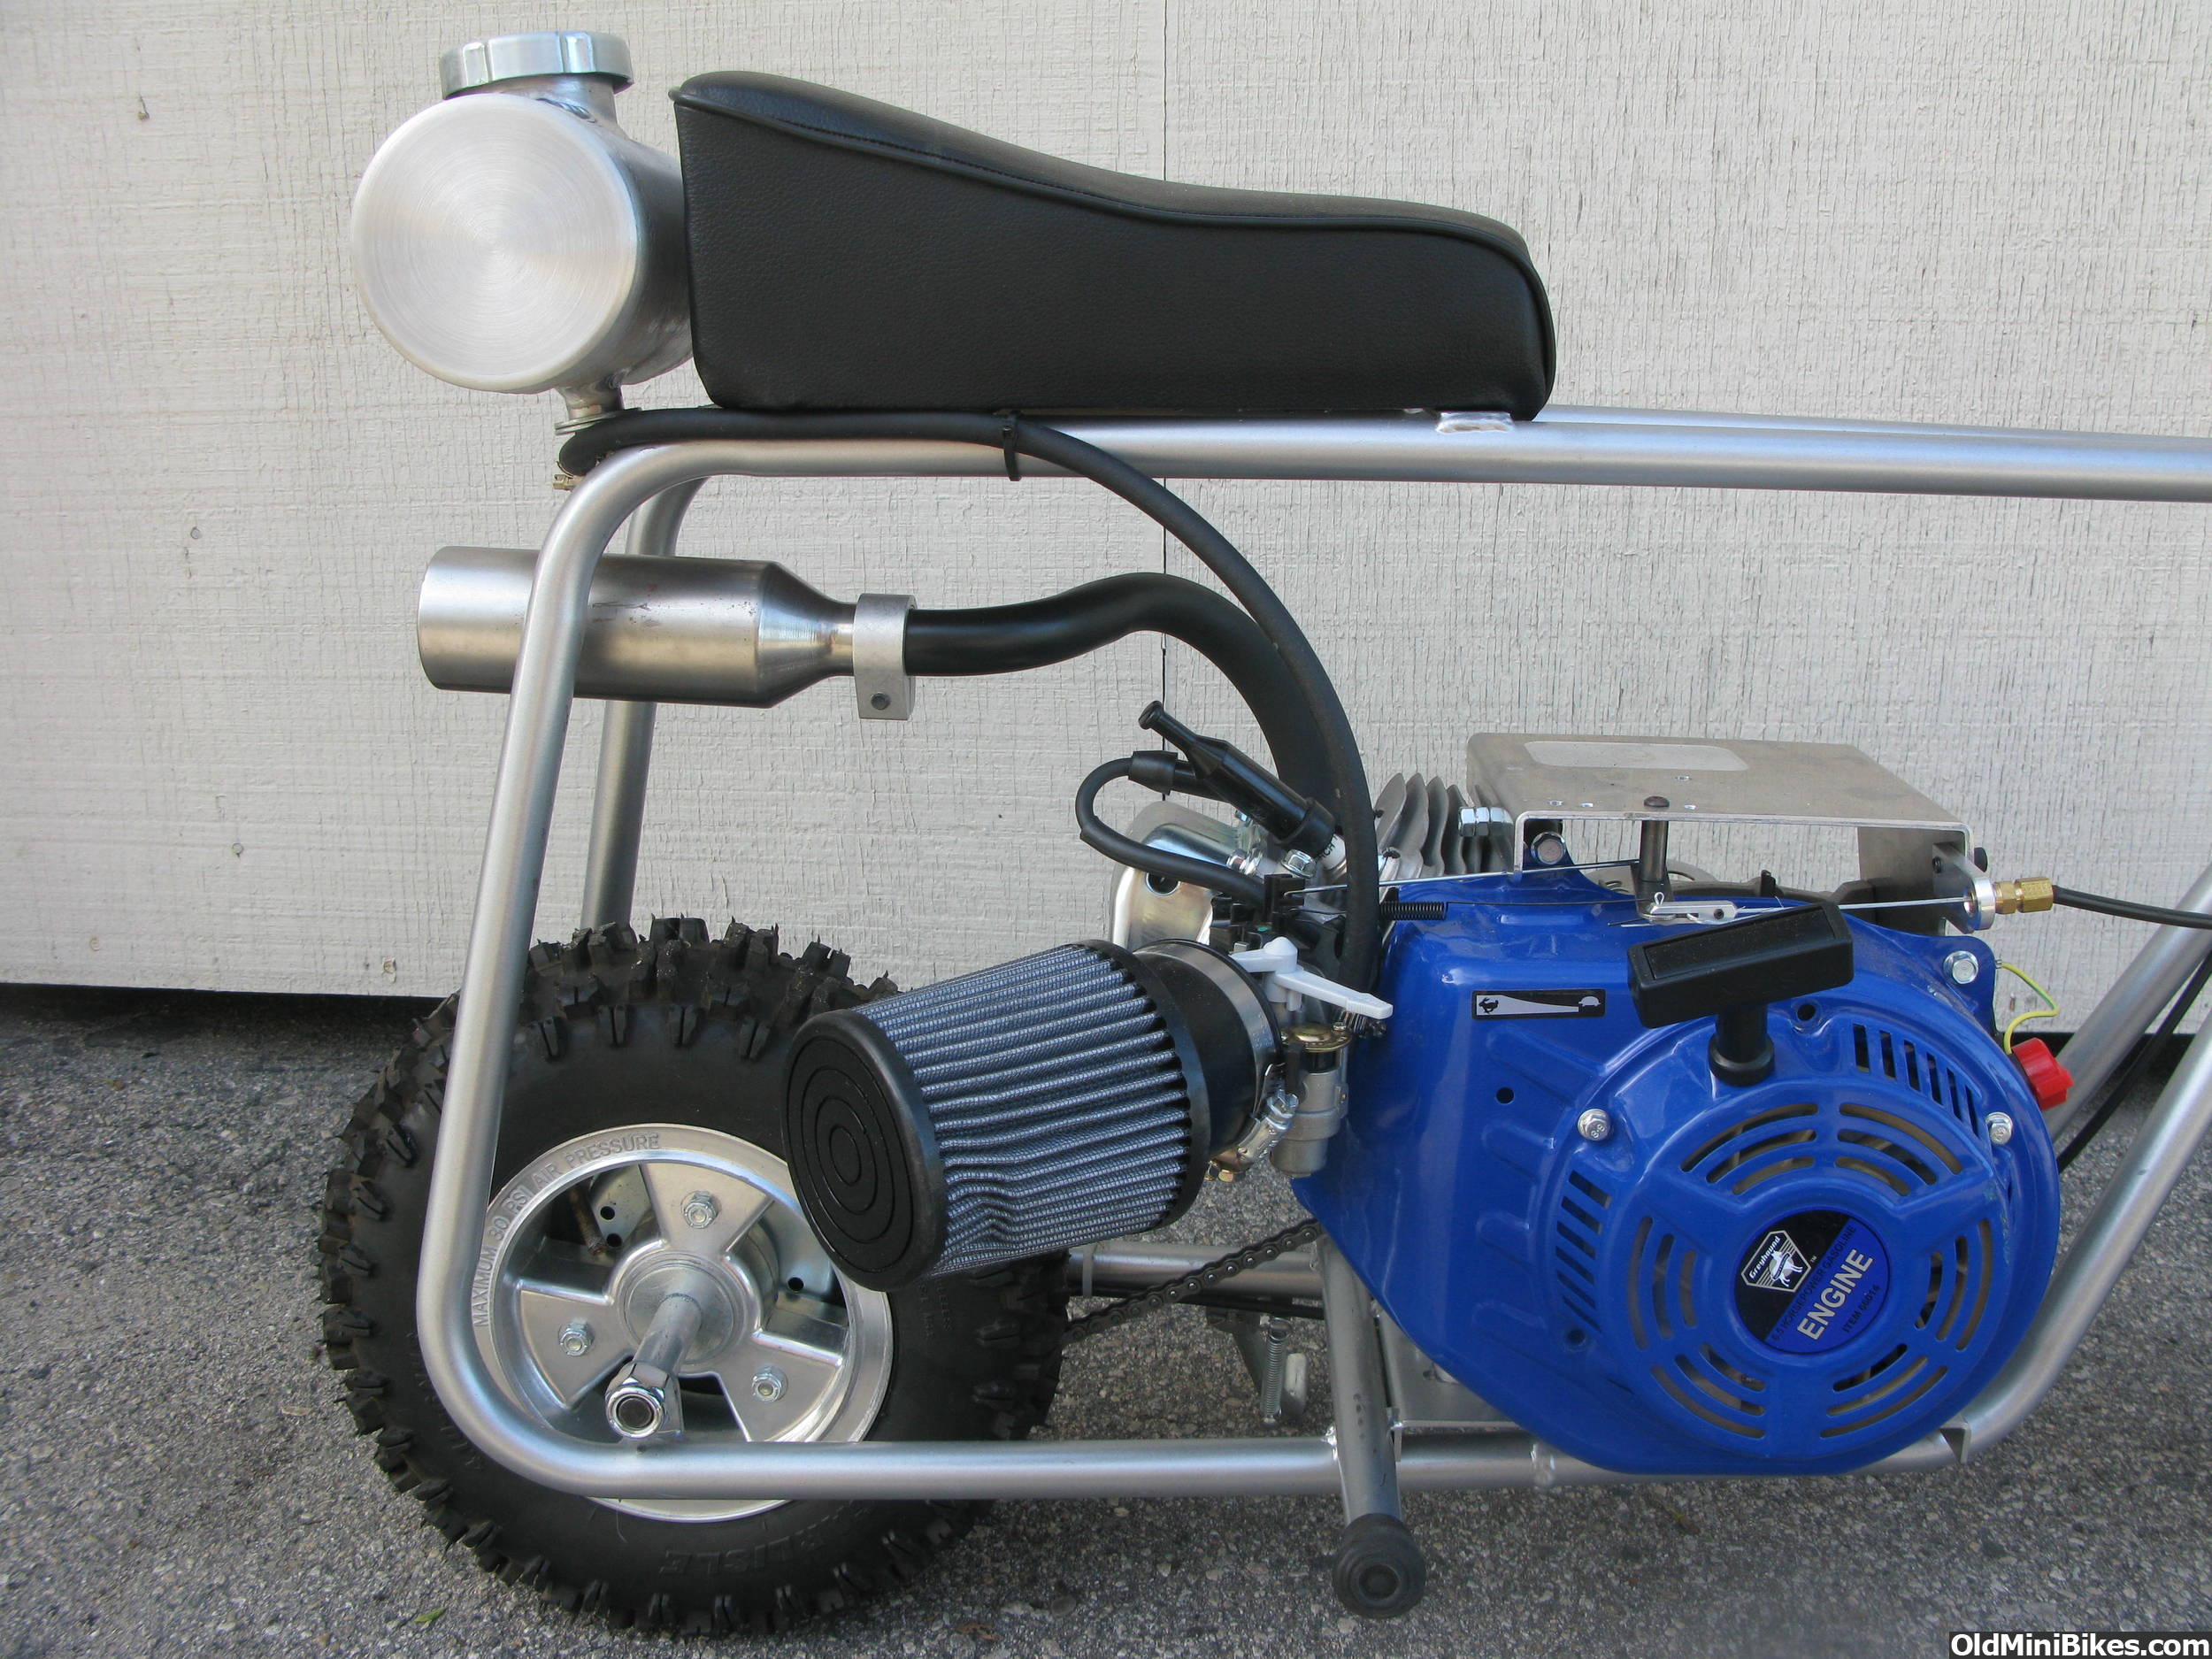 Minibike for sale